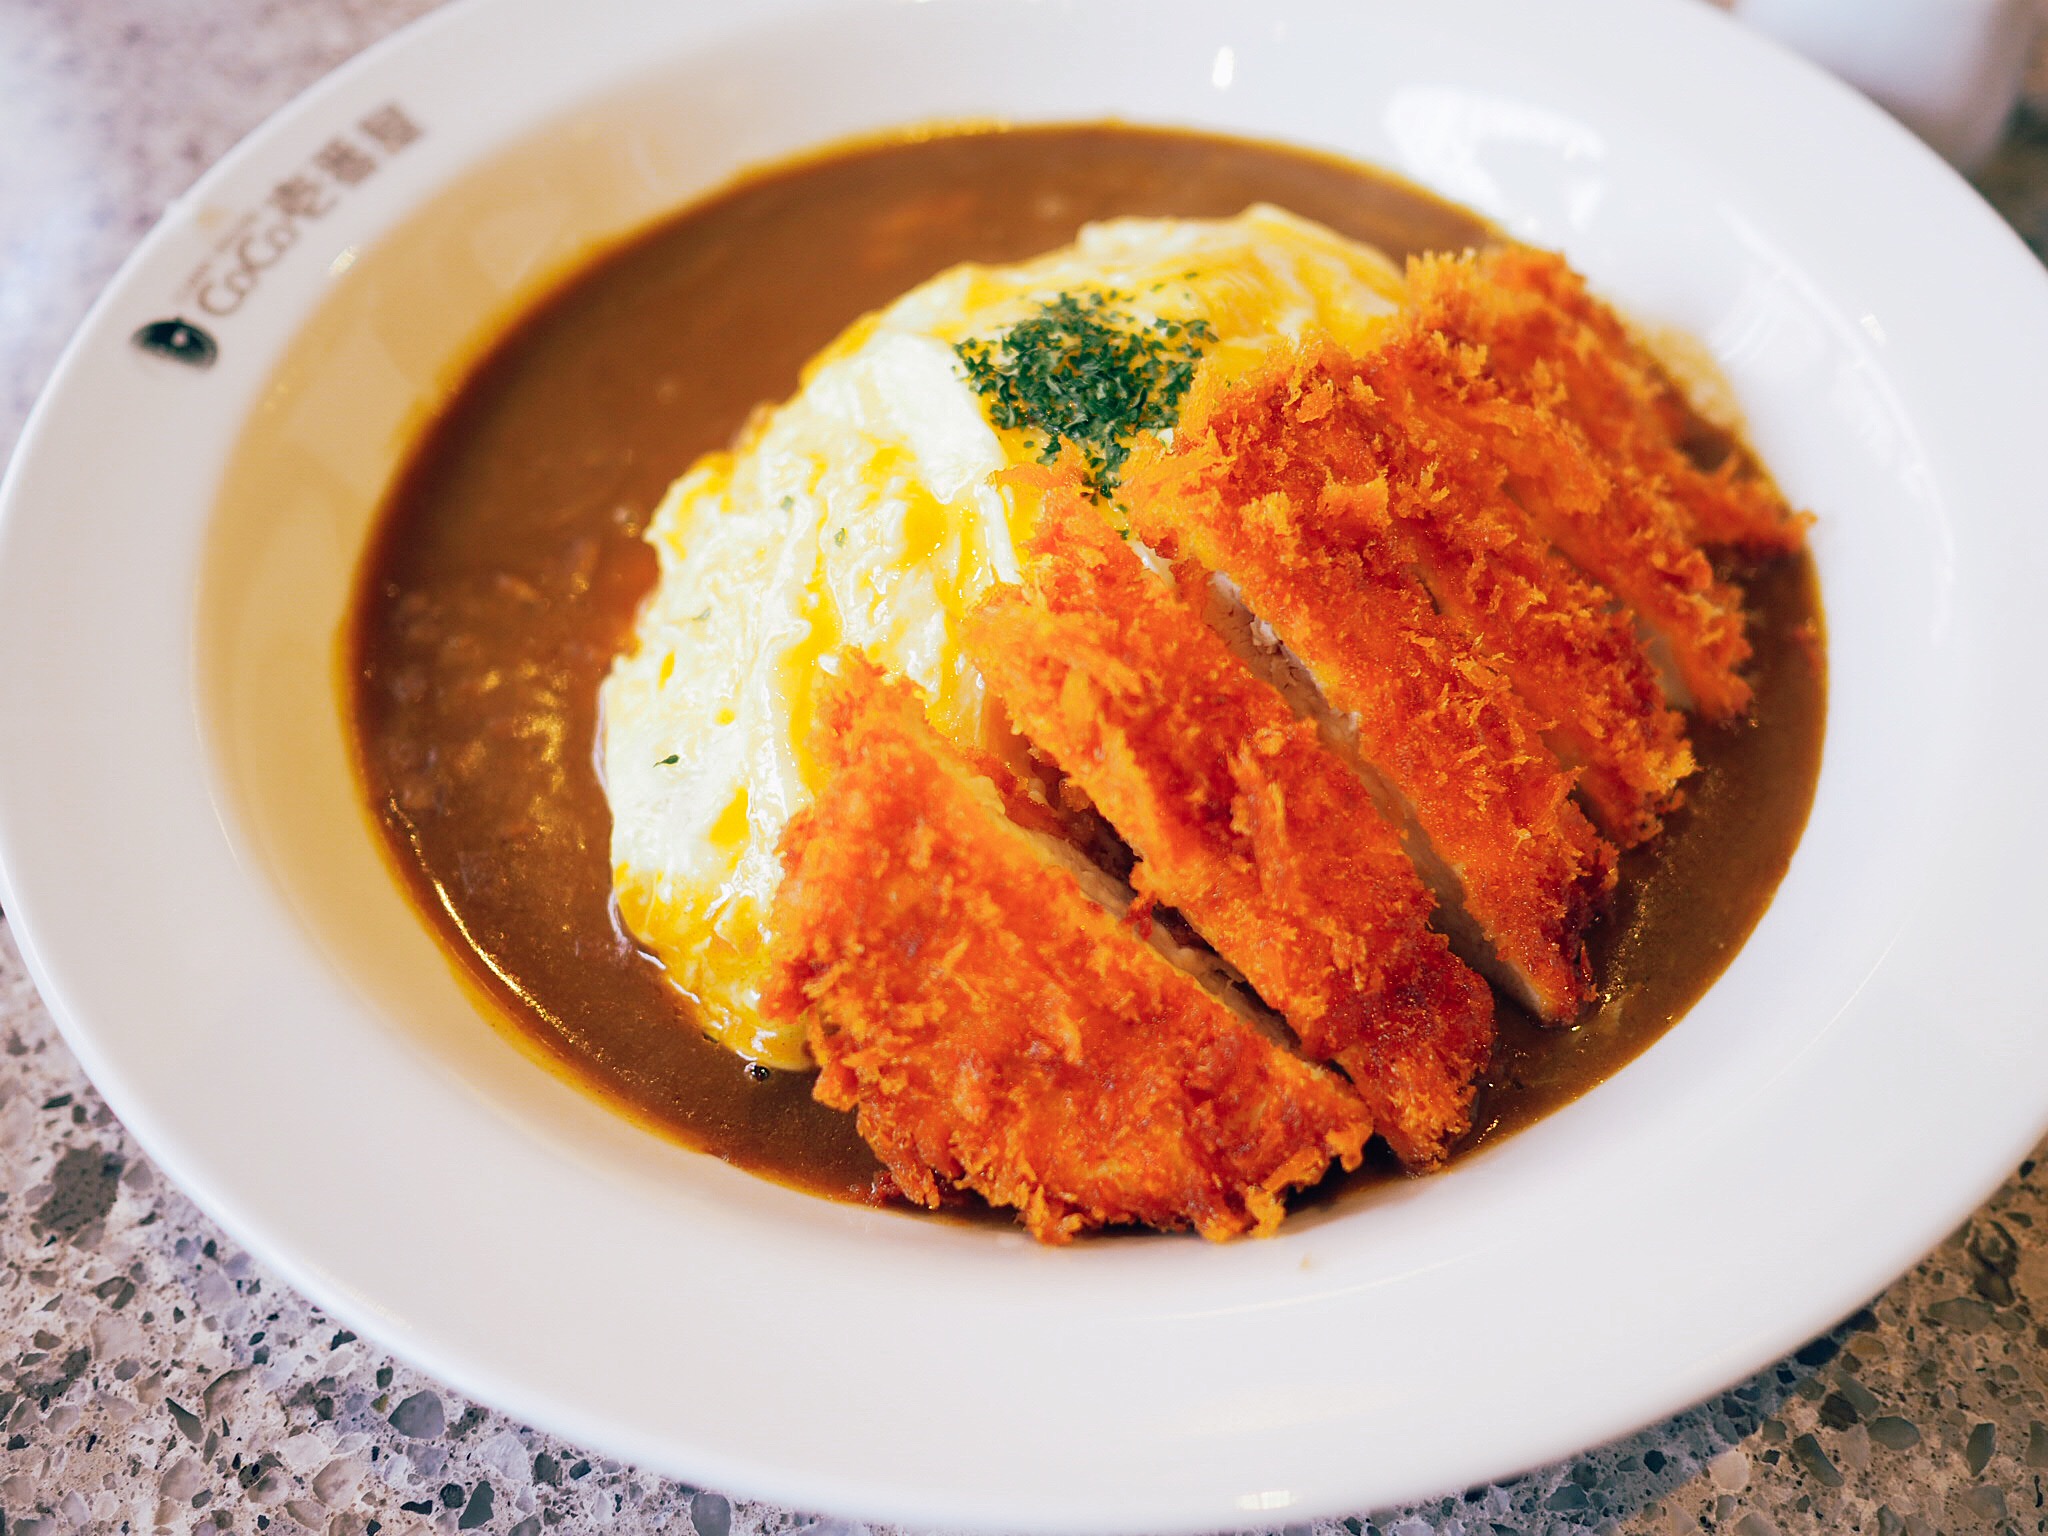 Coco Ichibanya Japan S Biggest Curry S House Comes To London The Food Connoisseur